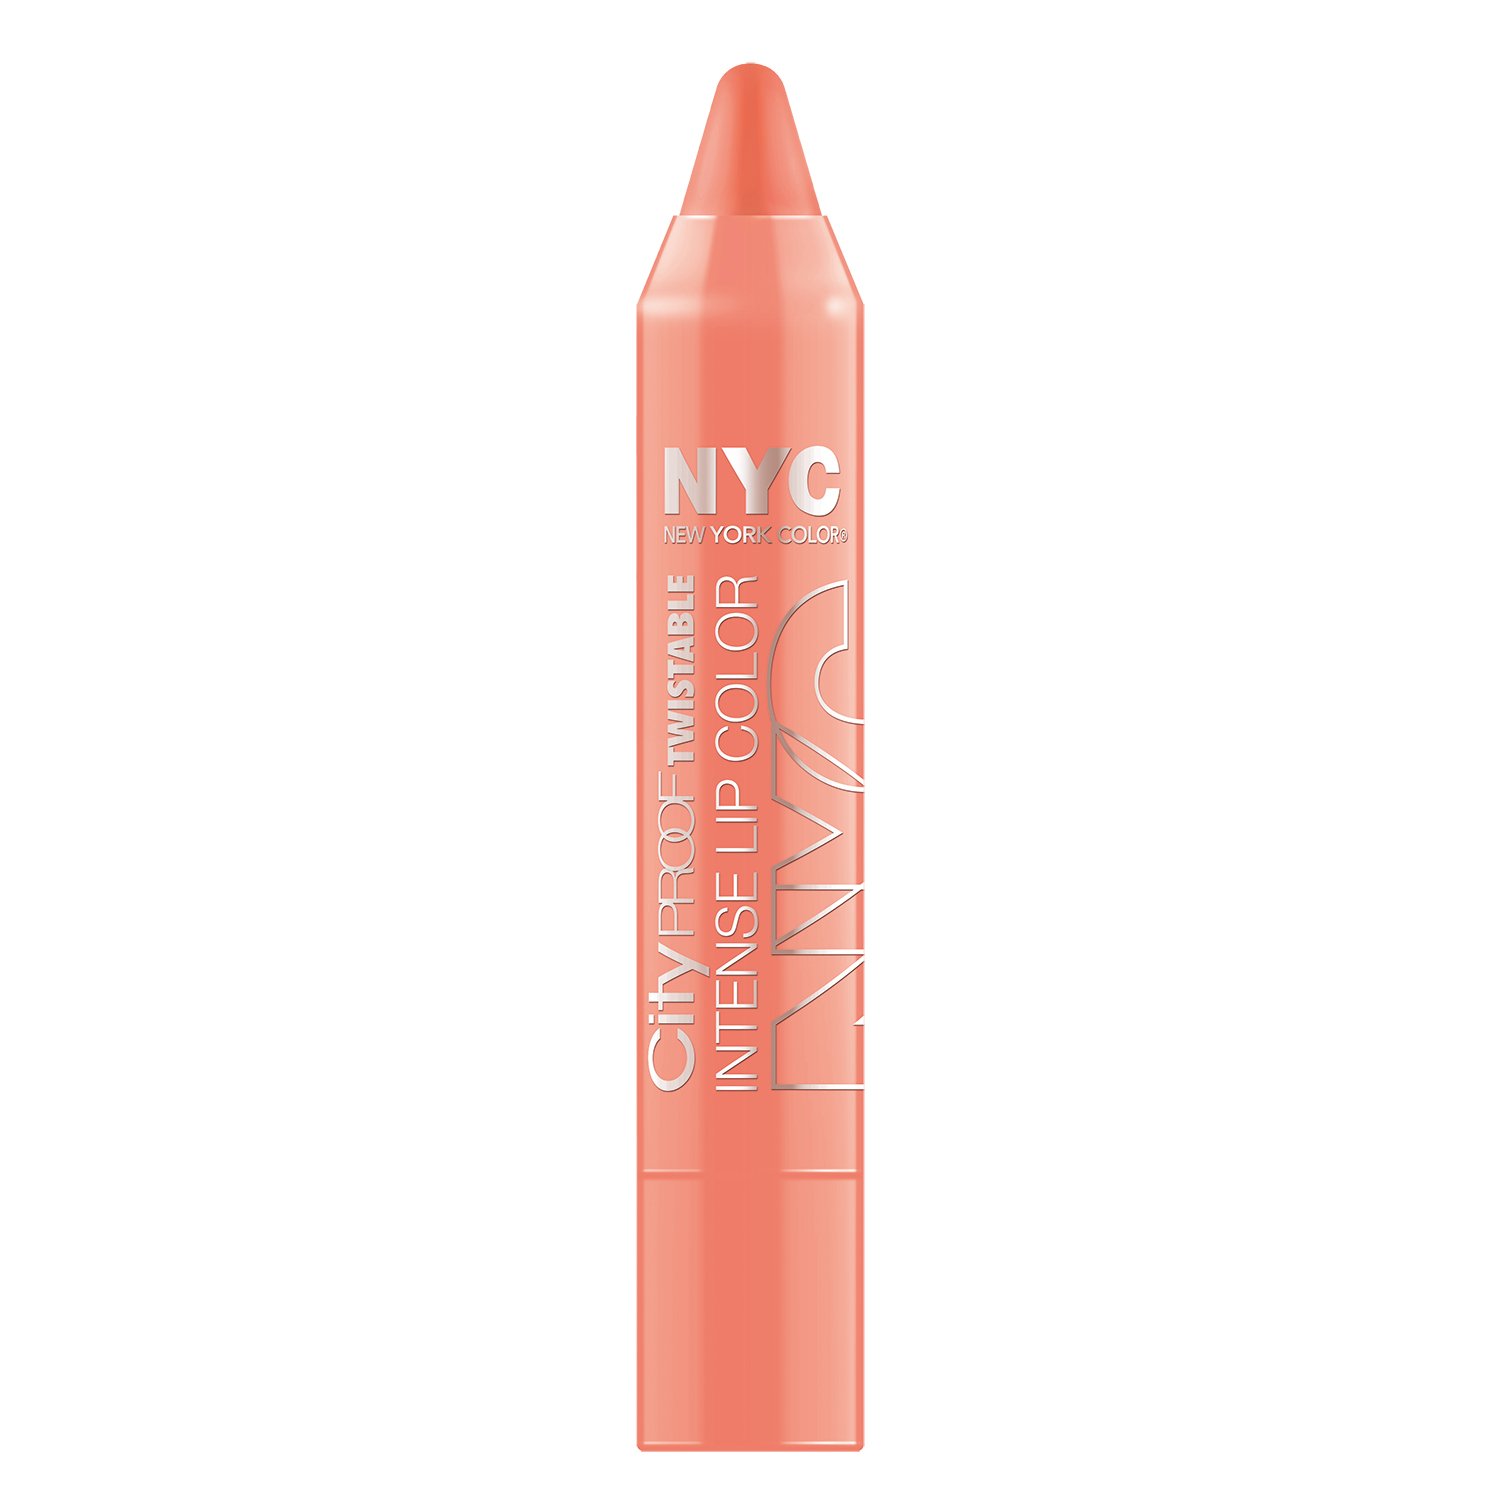 N.Y.C. New York Color City Proof Twistable Intense Lip Color, Parkslope Peach - image 1 of 2